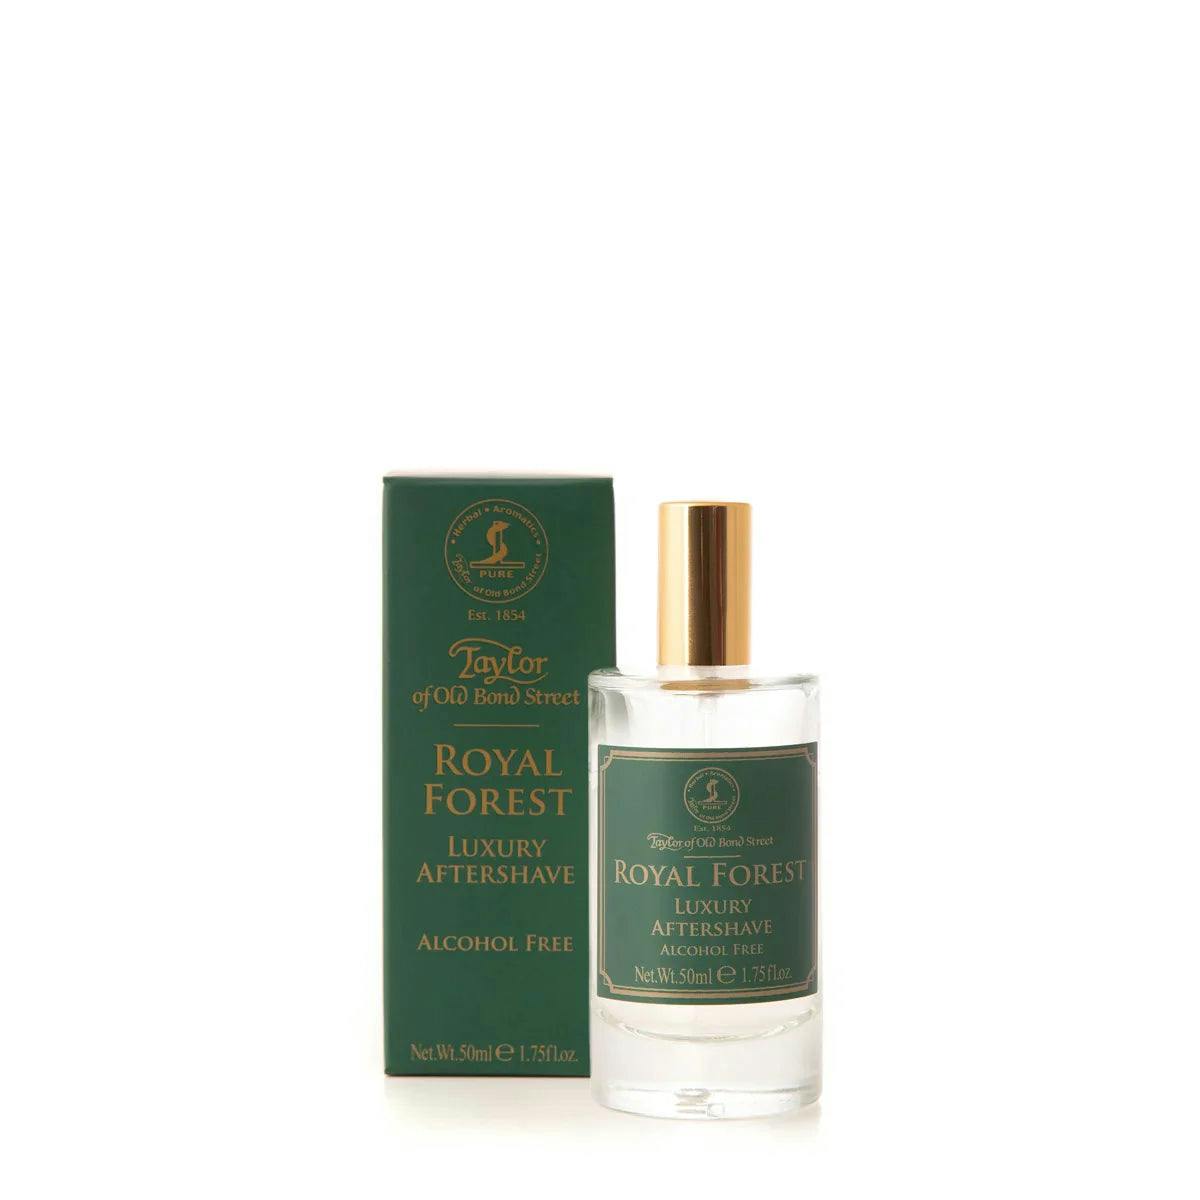 Taylor of Old Bond Street Royal Forest Aftershave Lotion 50ml